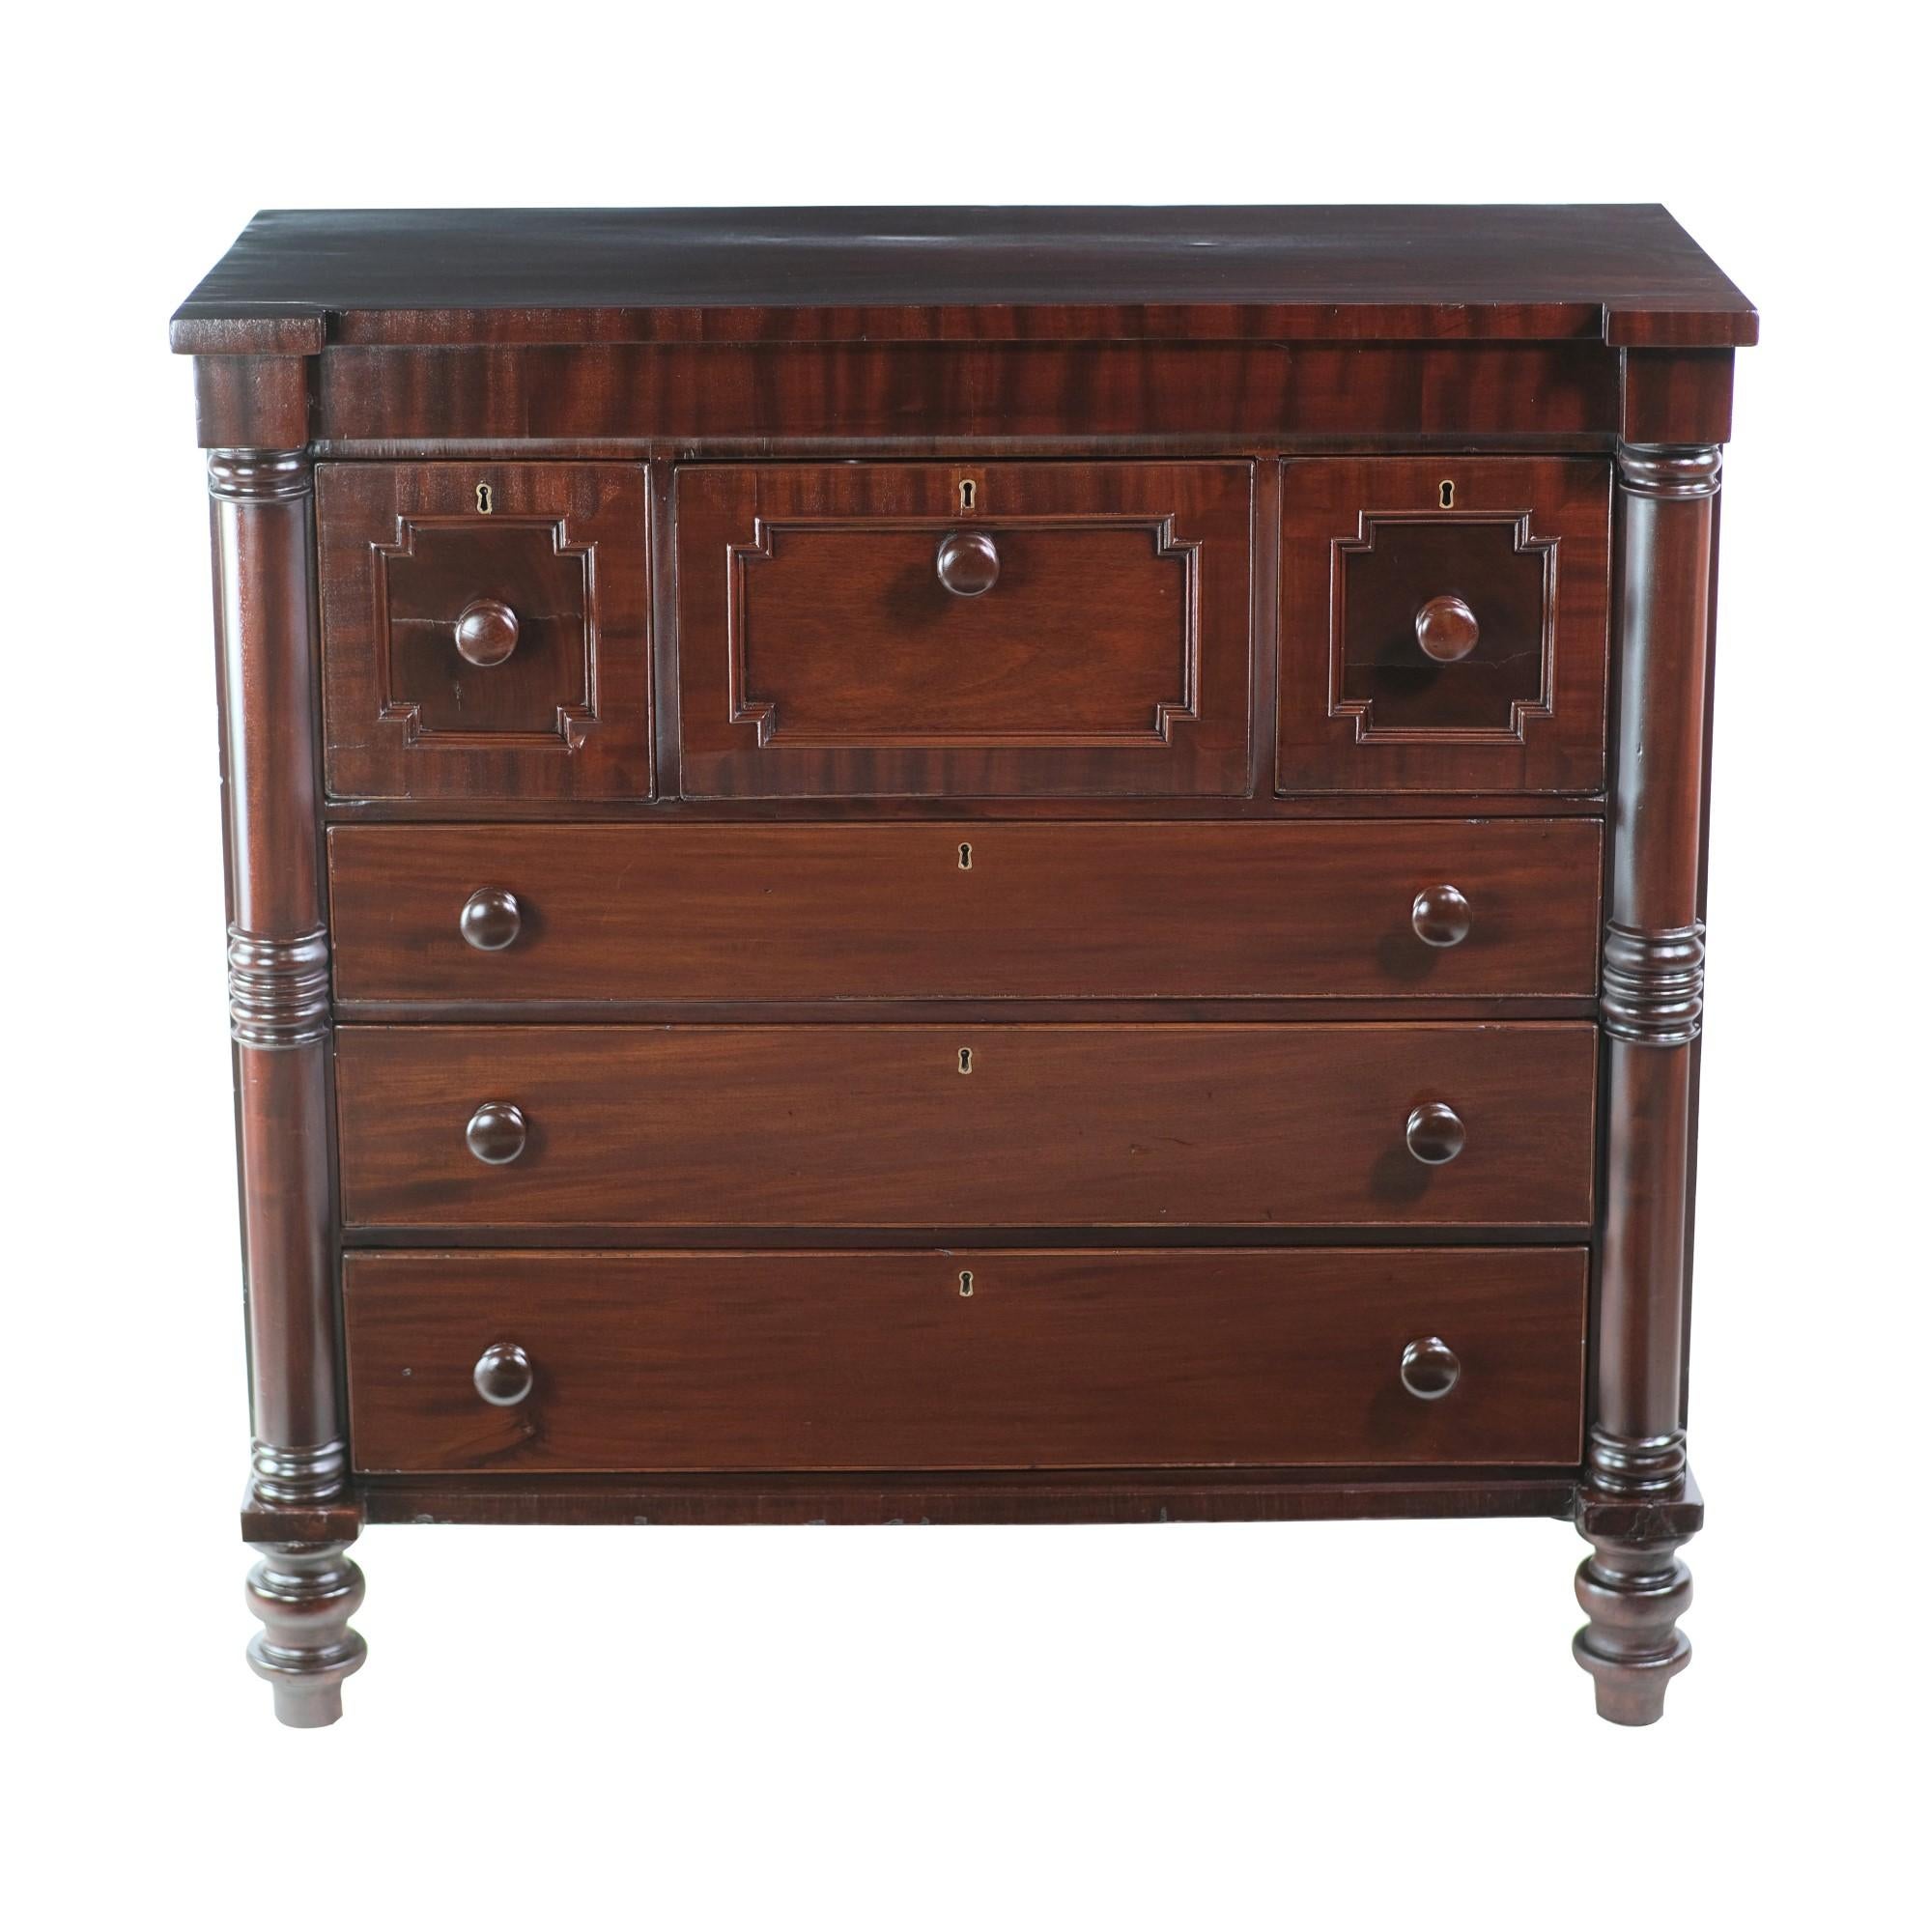 Dark tone mahogany dresser with six chestnut drawer interiors. Done in an Empire style. No key. This can be seen at our 302 Bowery location in NoHo in Manhattan.